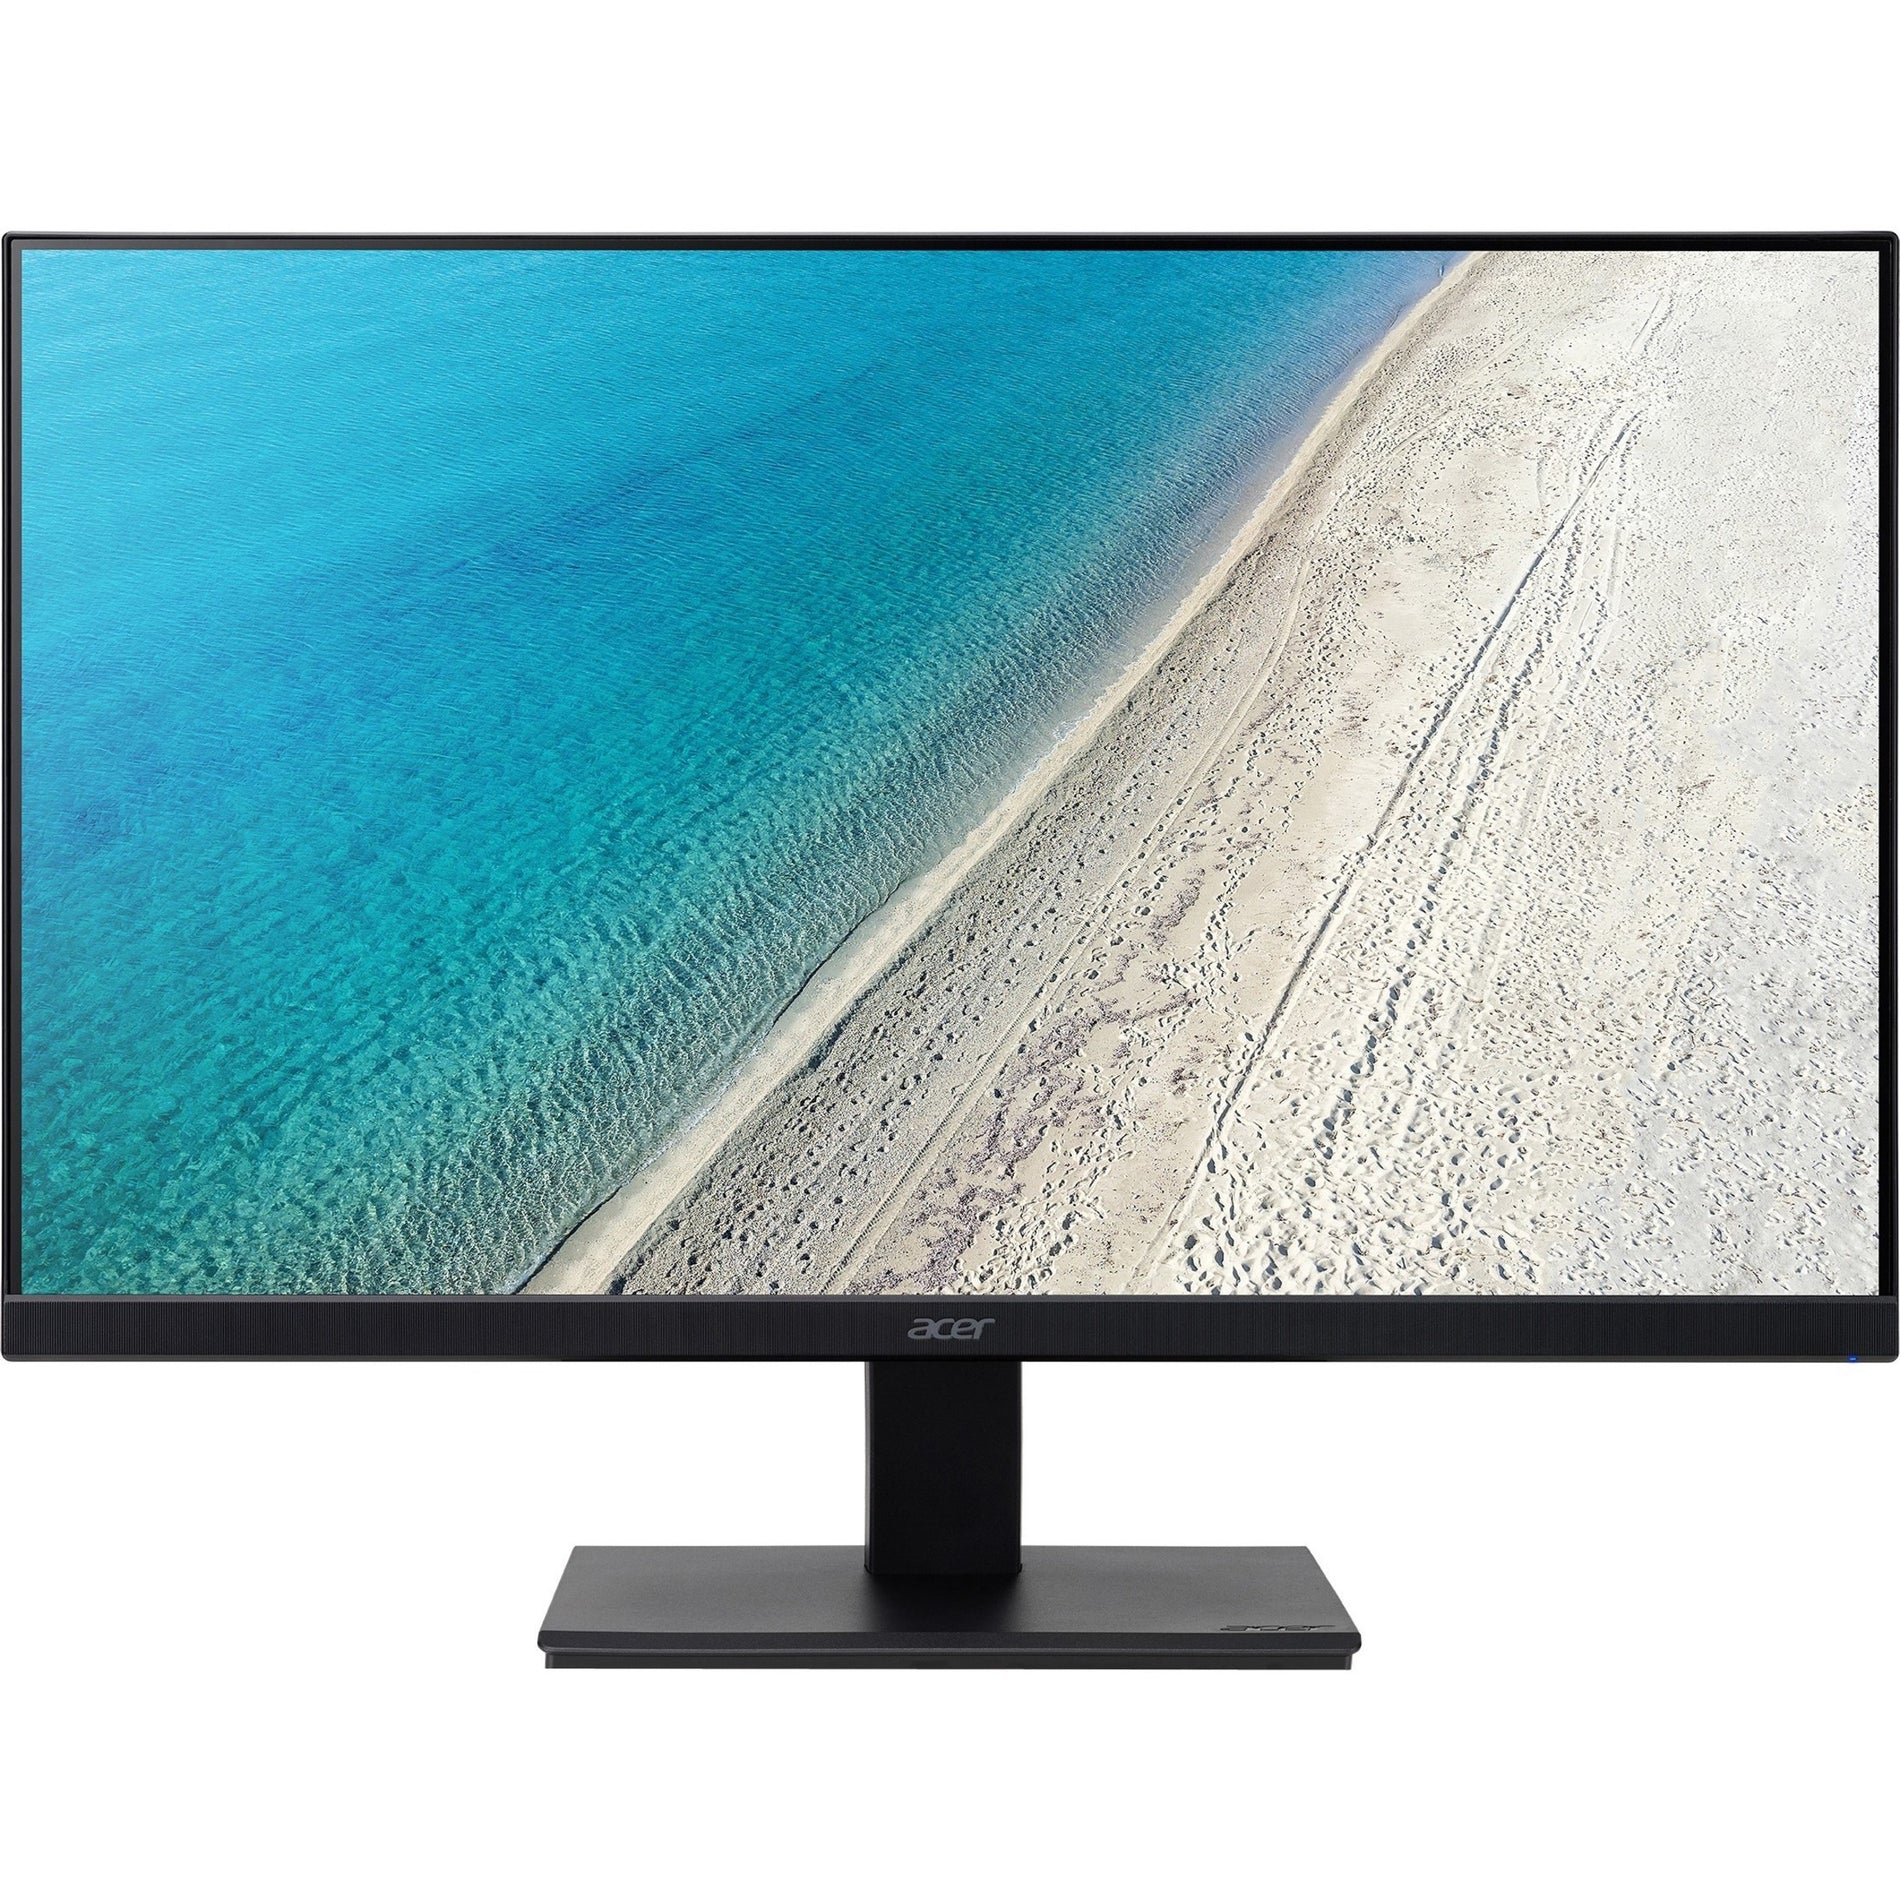 Acer UM.QV7AA.005 V247Y 23.8" Full HD LCD Monitor, Black - Adaptive Sync, TCO Certified